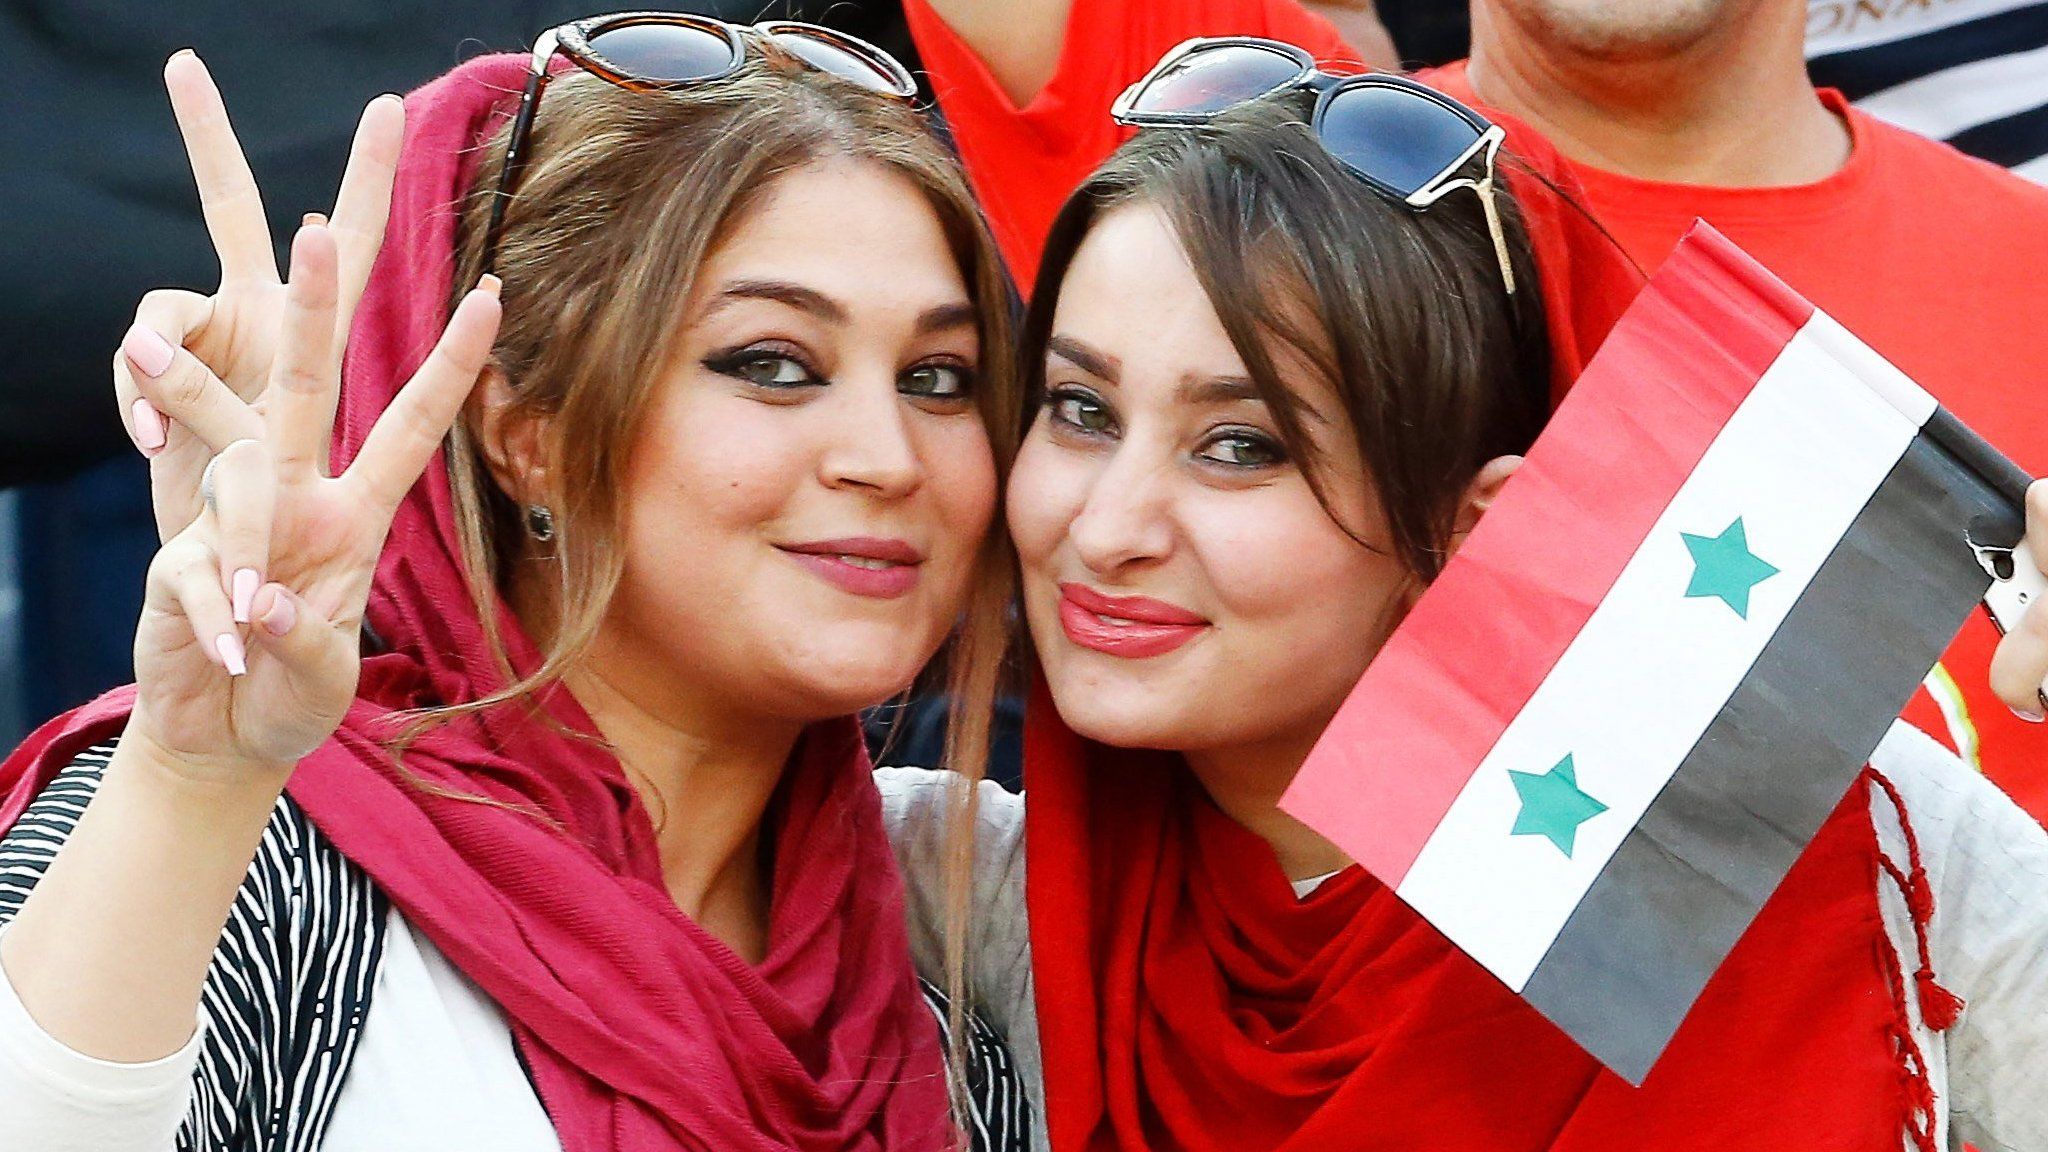 Fans of Syria pose during the FIFA World Cup 2018 qualifying soccer match between Iran and Syria at the Azadi stadium in Tehran, Iran, 5 September 2017